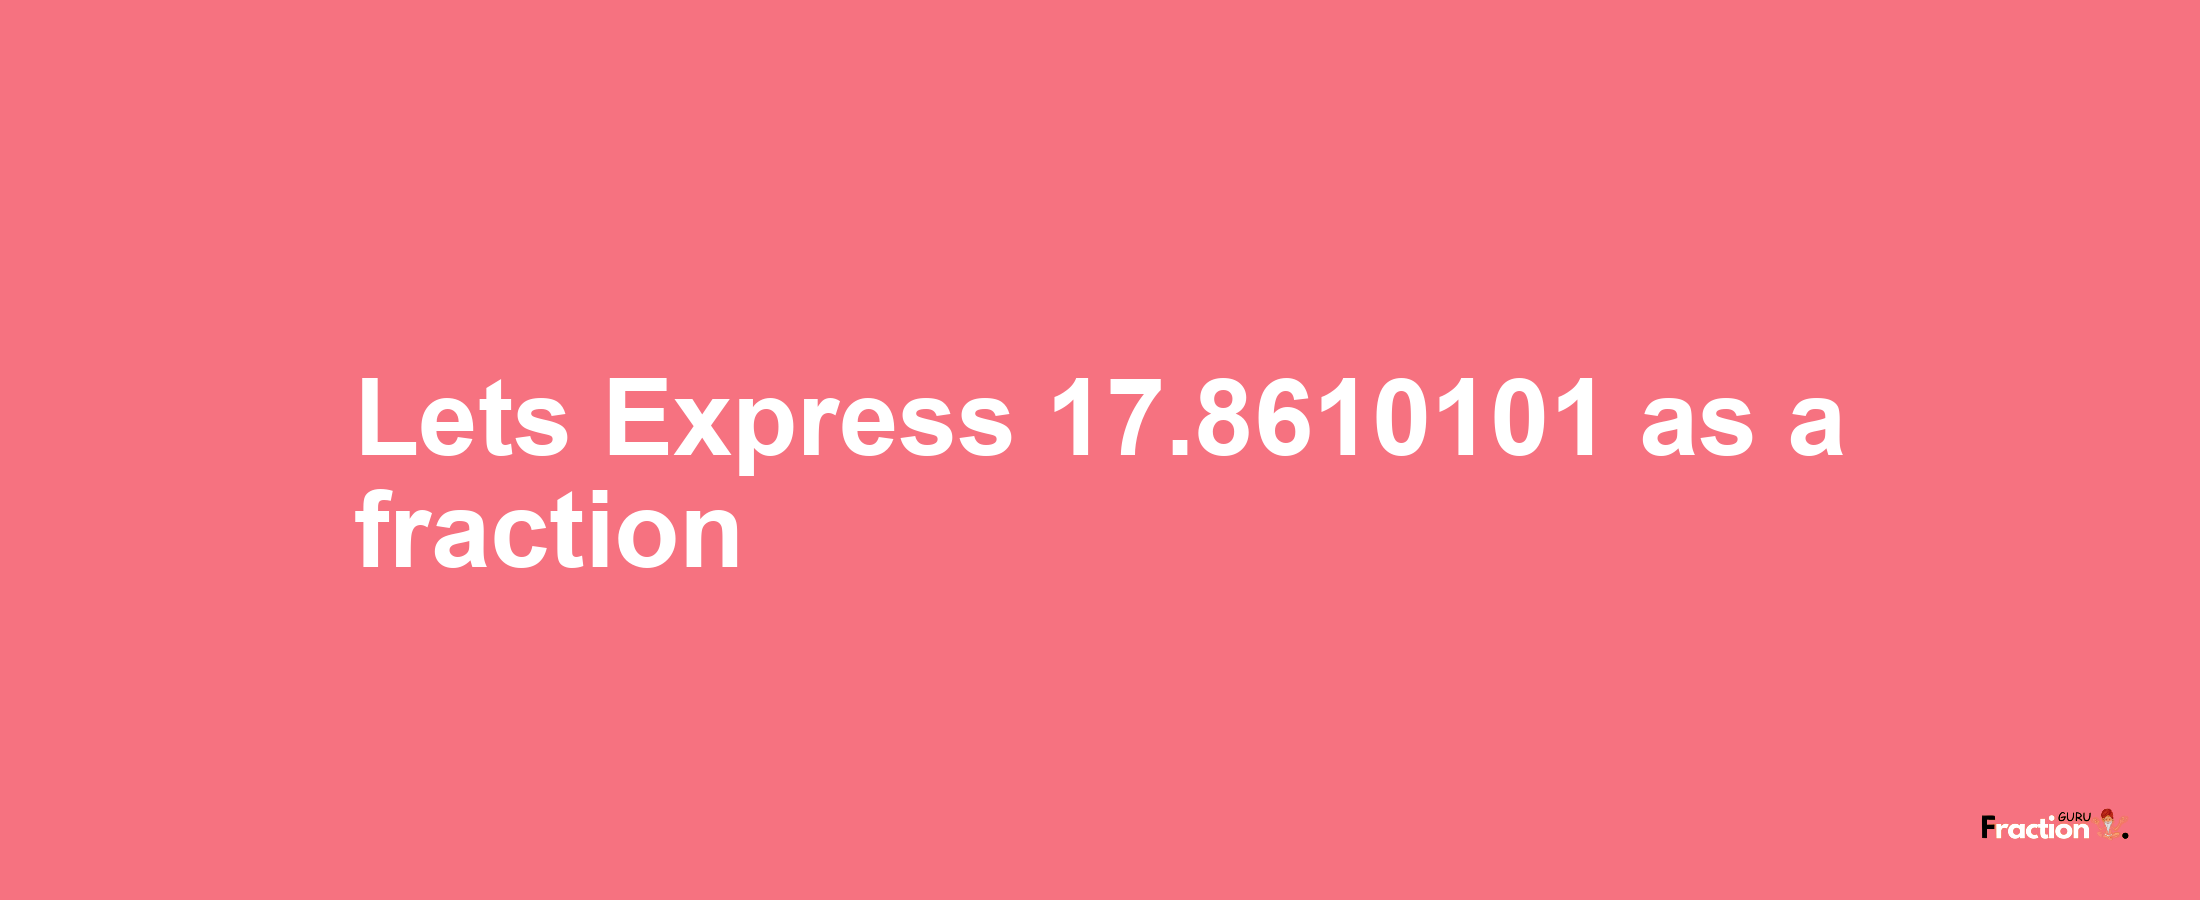 Lets Express 17.8610101 as afraction